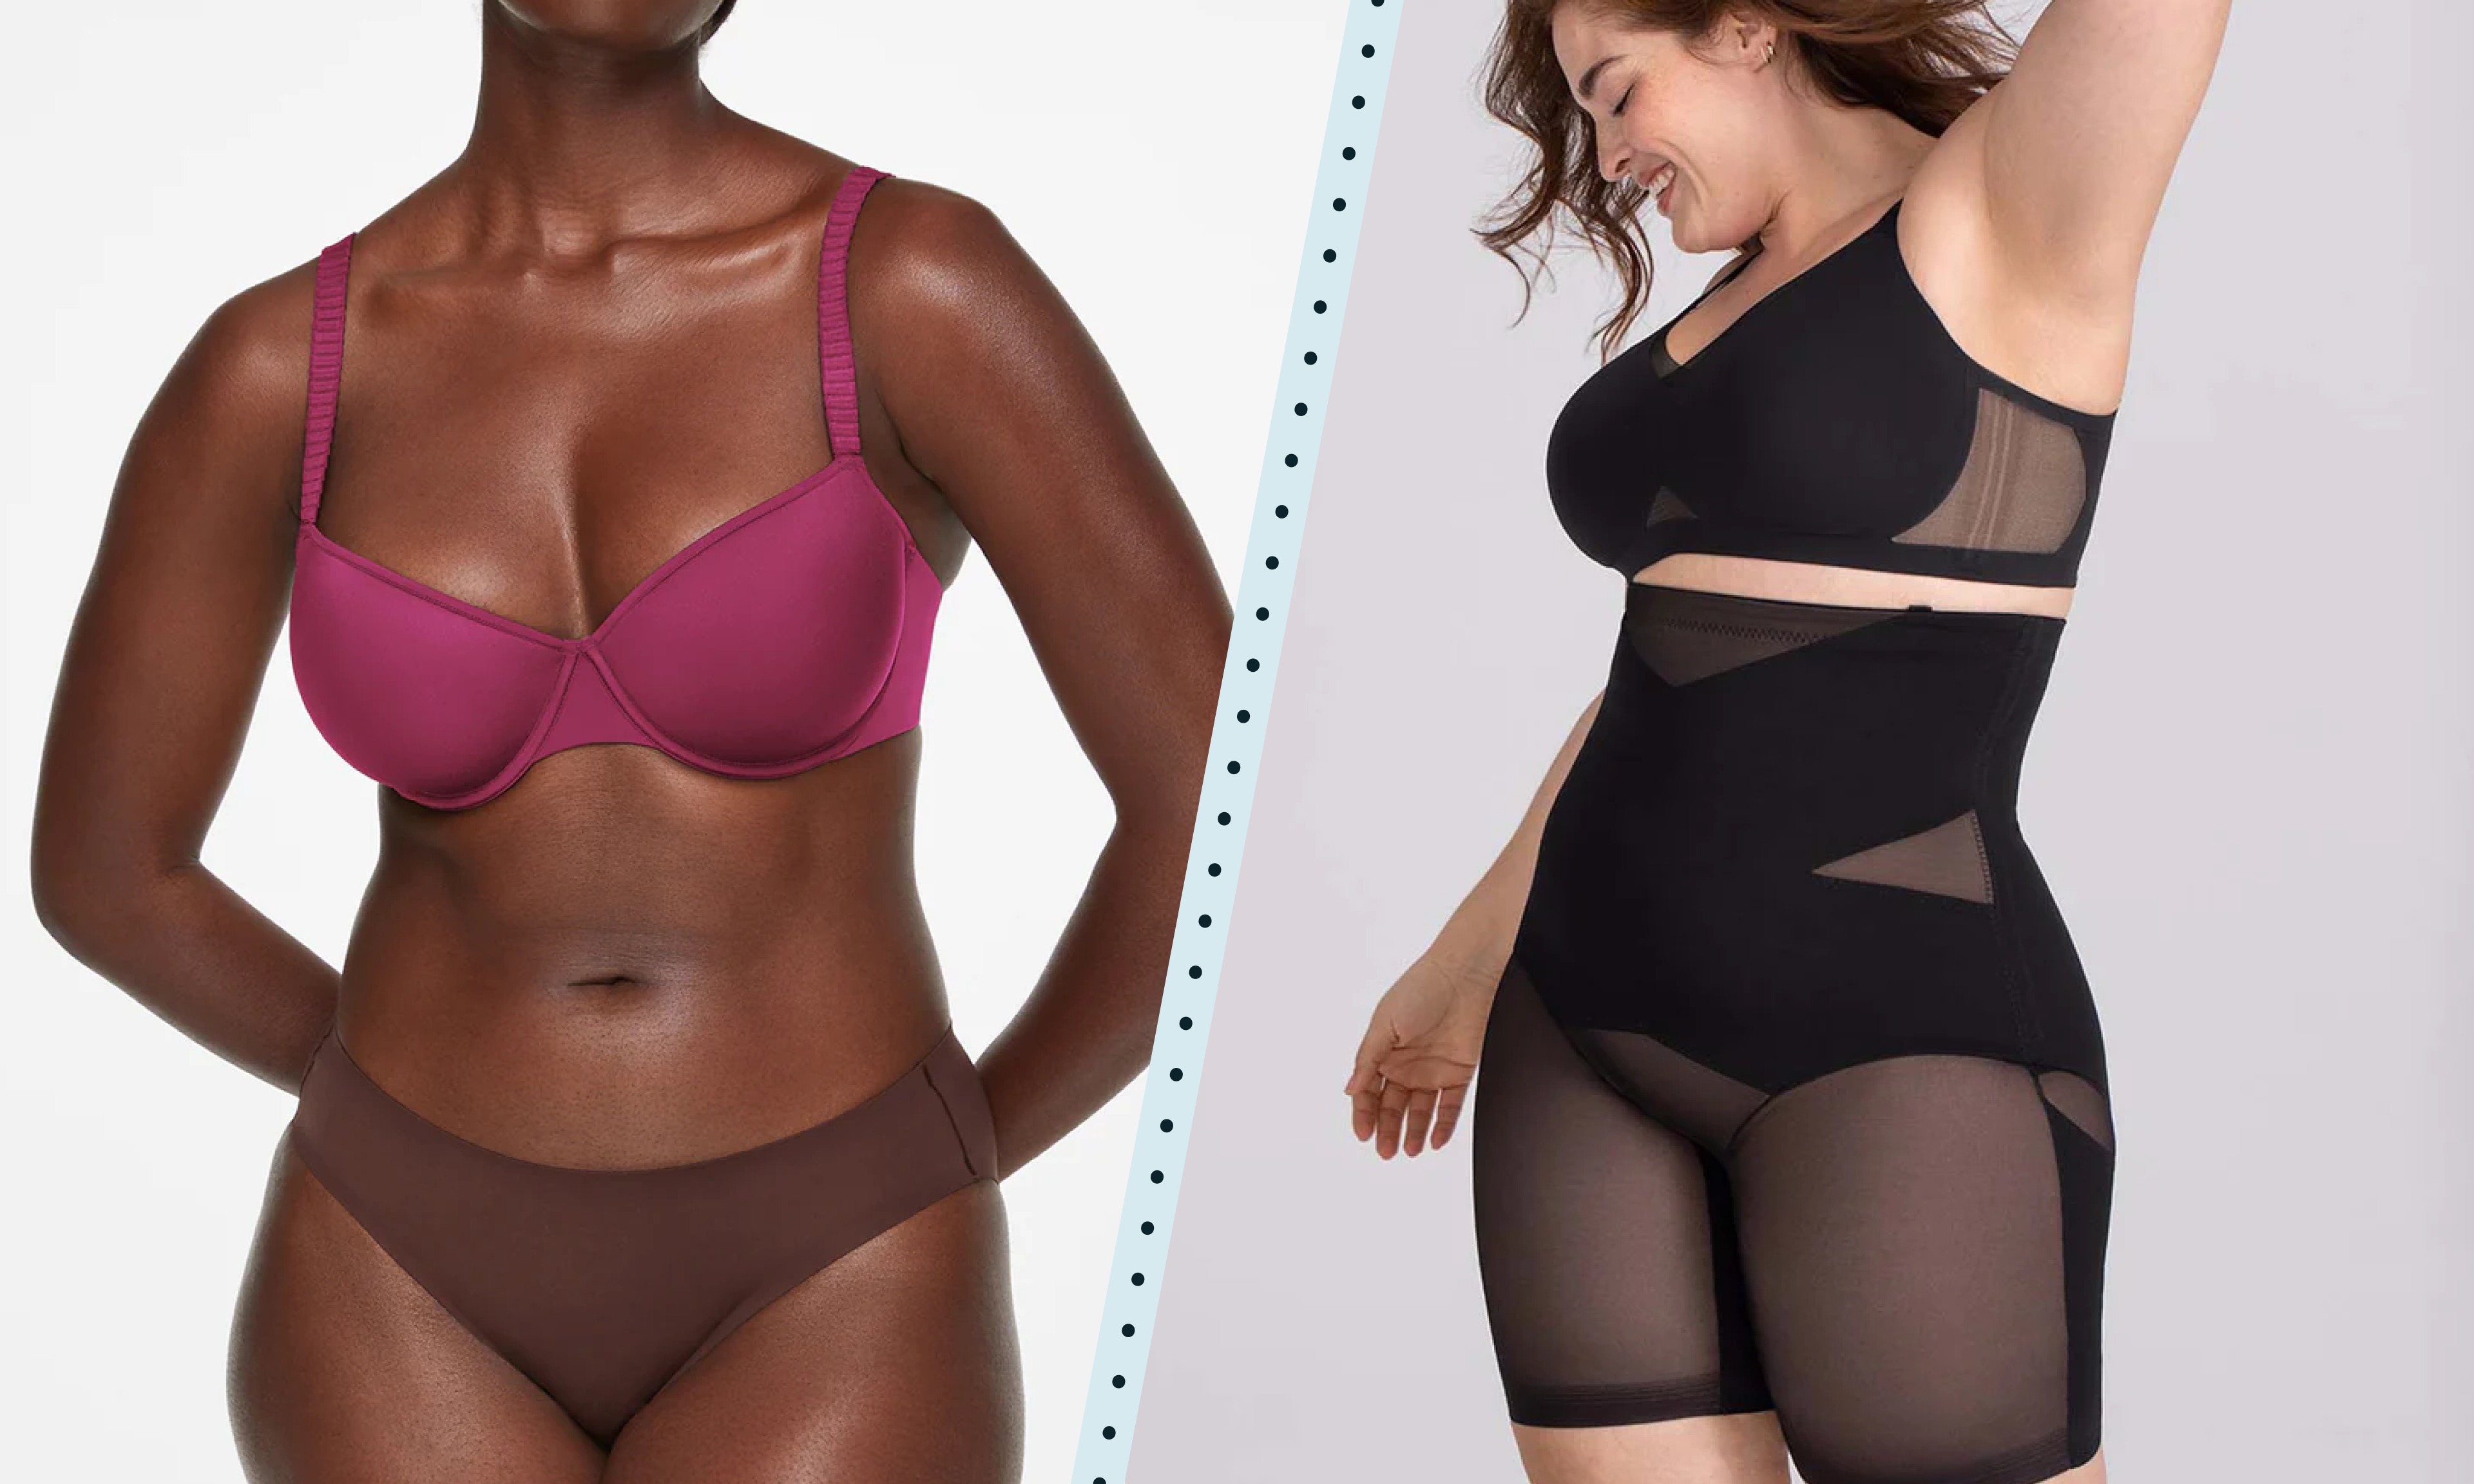 THE BEST PLUS SIZE SHAPEWEAR IN THE WORLD!! I'm wearing a 3x